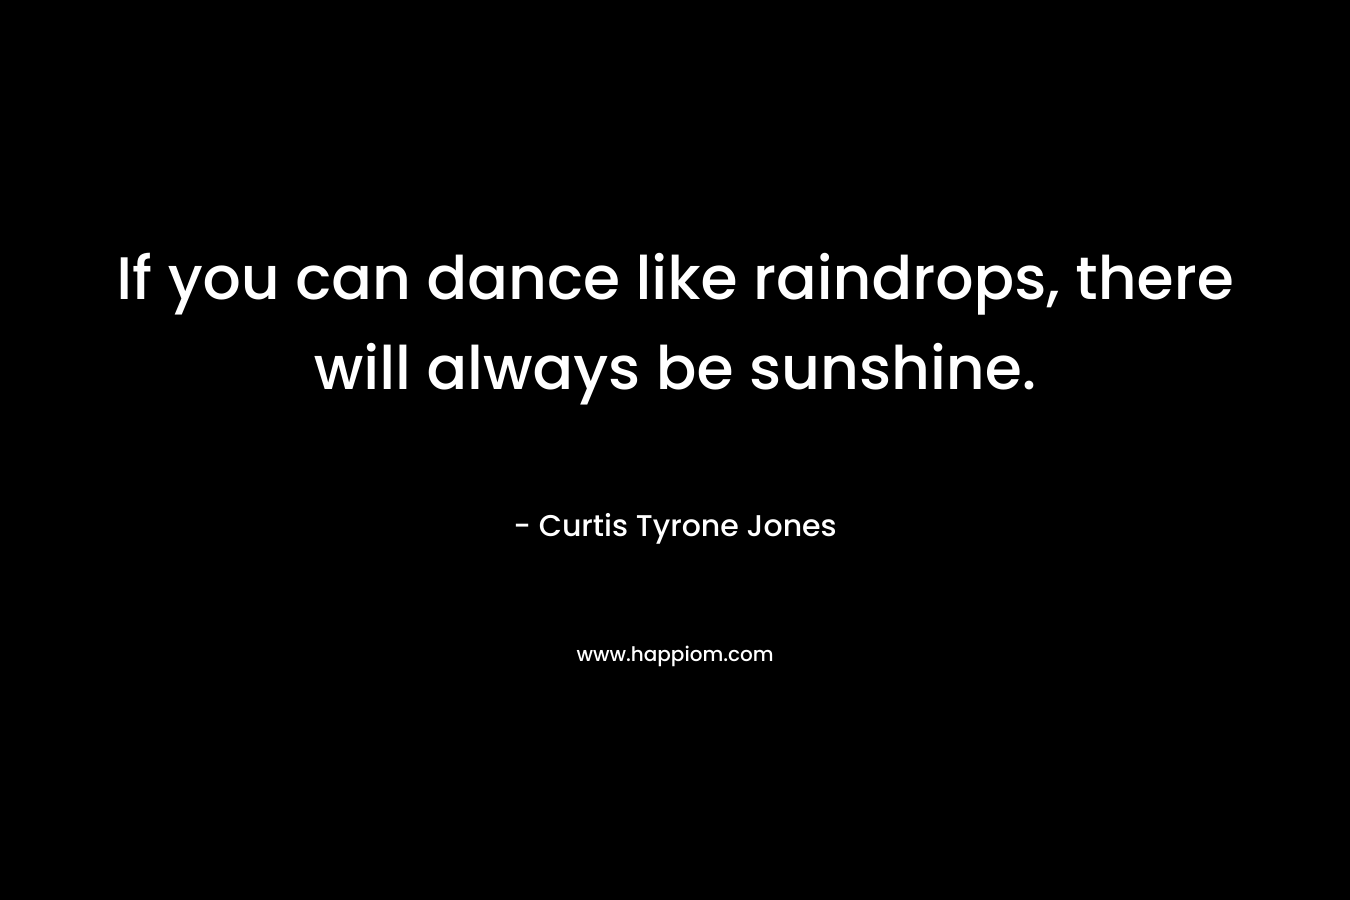 If you can dance like raindrops, there will always be sunshine. – Curtis Tyrone Jones